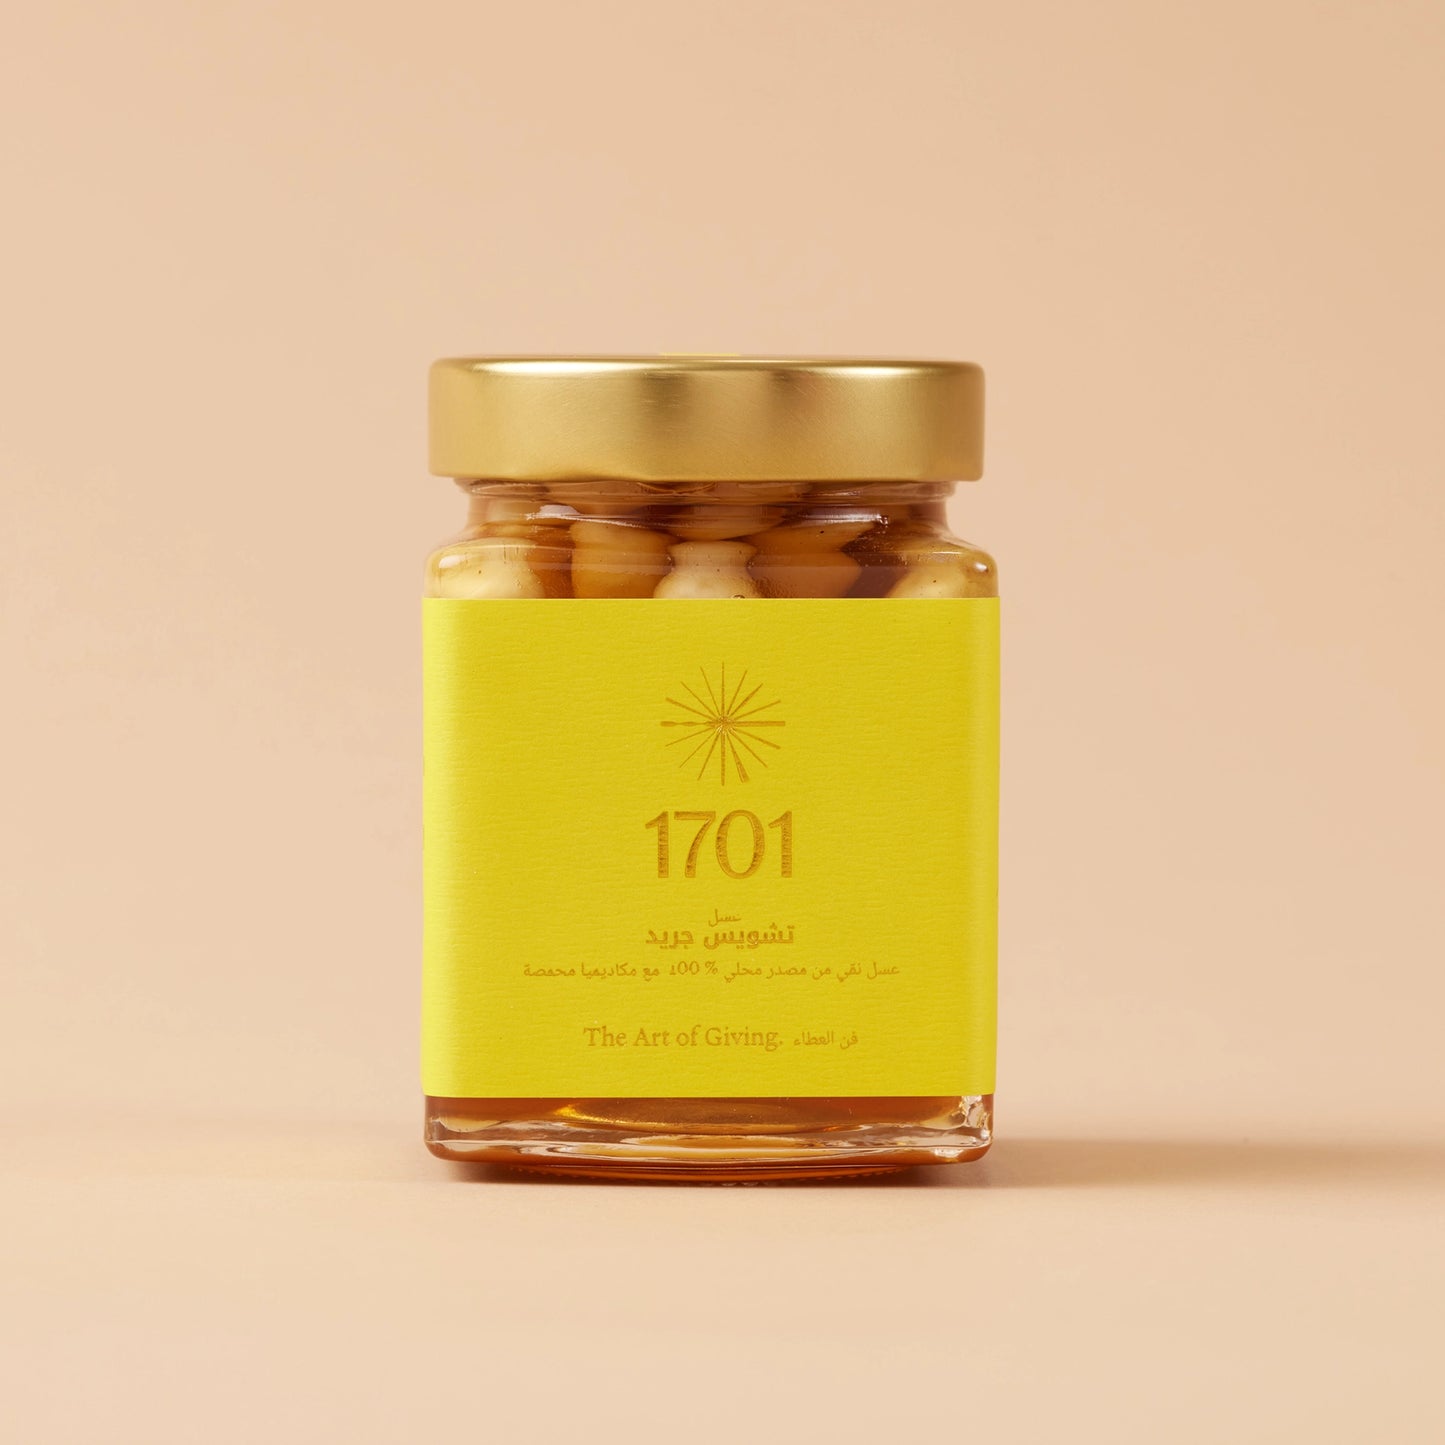 100% Locally Sourced Honey with Whole Roasted Macadamia Nuts